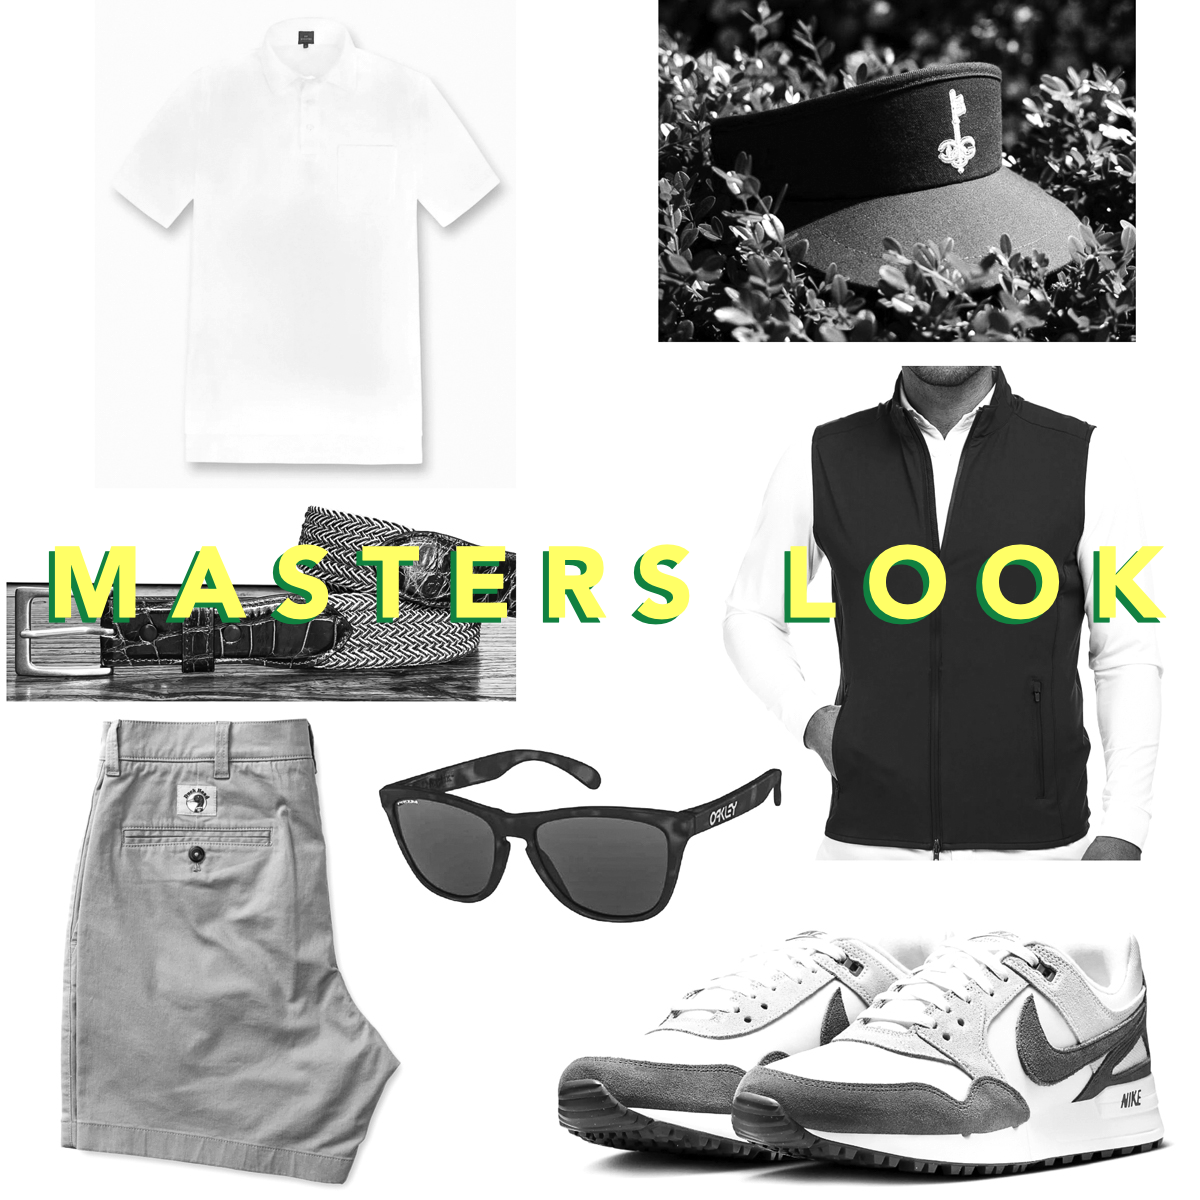 Masters Look & What To Buy